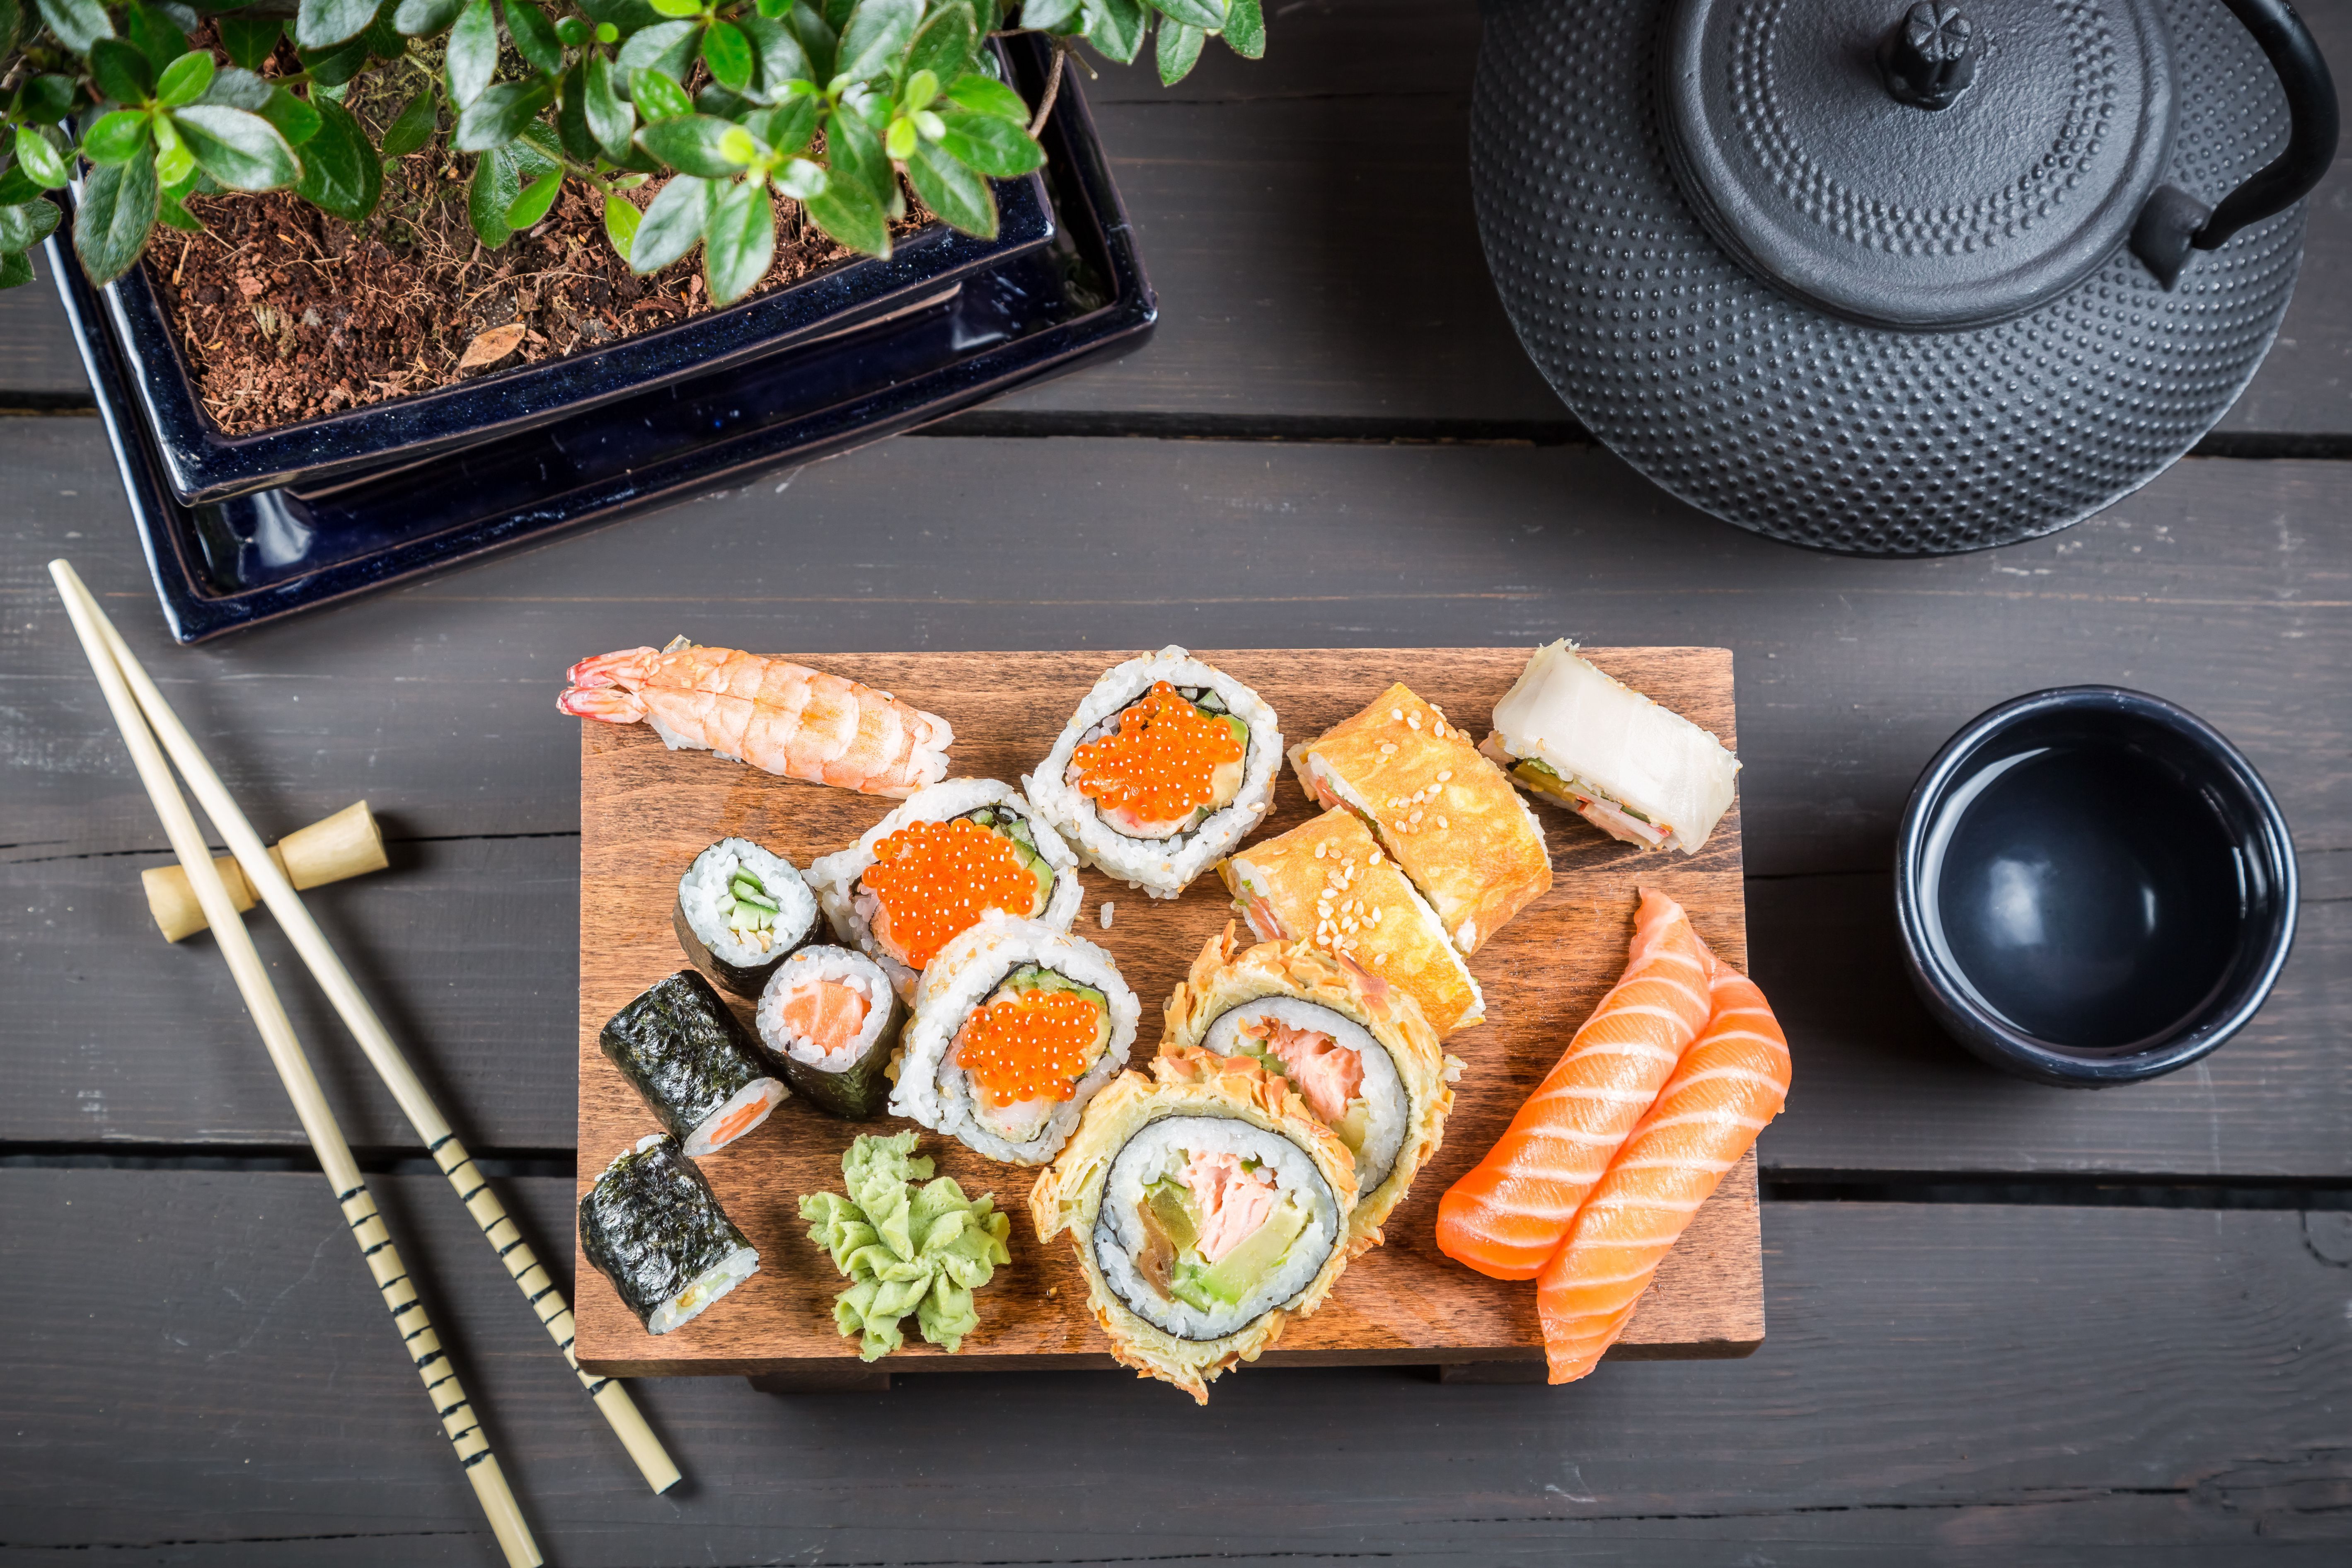 A variety of sushi and maki on a wooden board with chopsticks, a tea set, and a plant. - Sushi